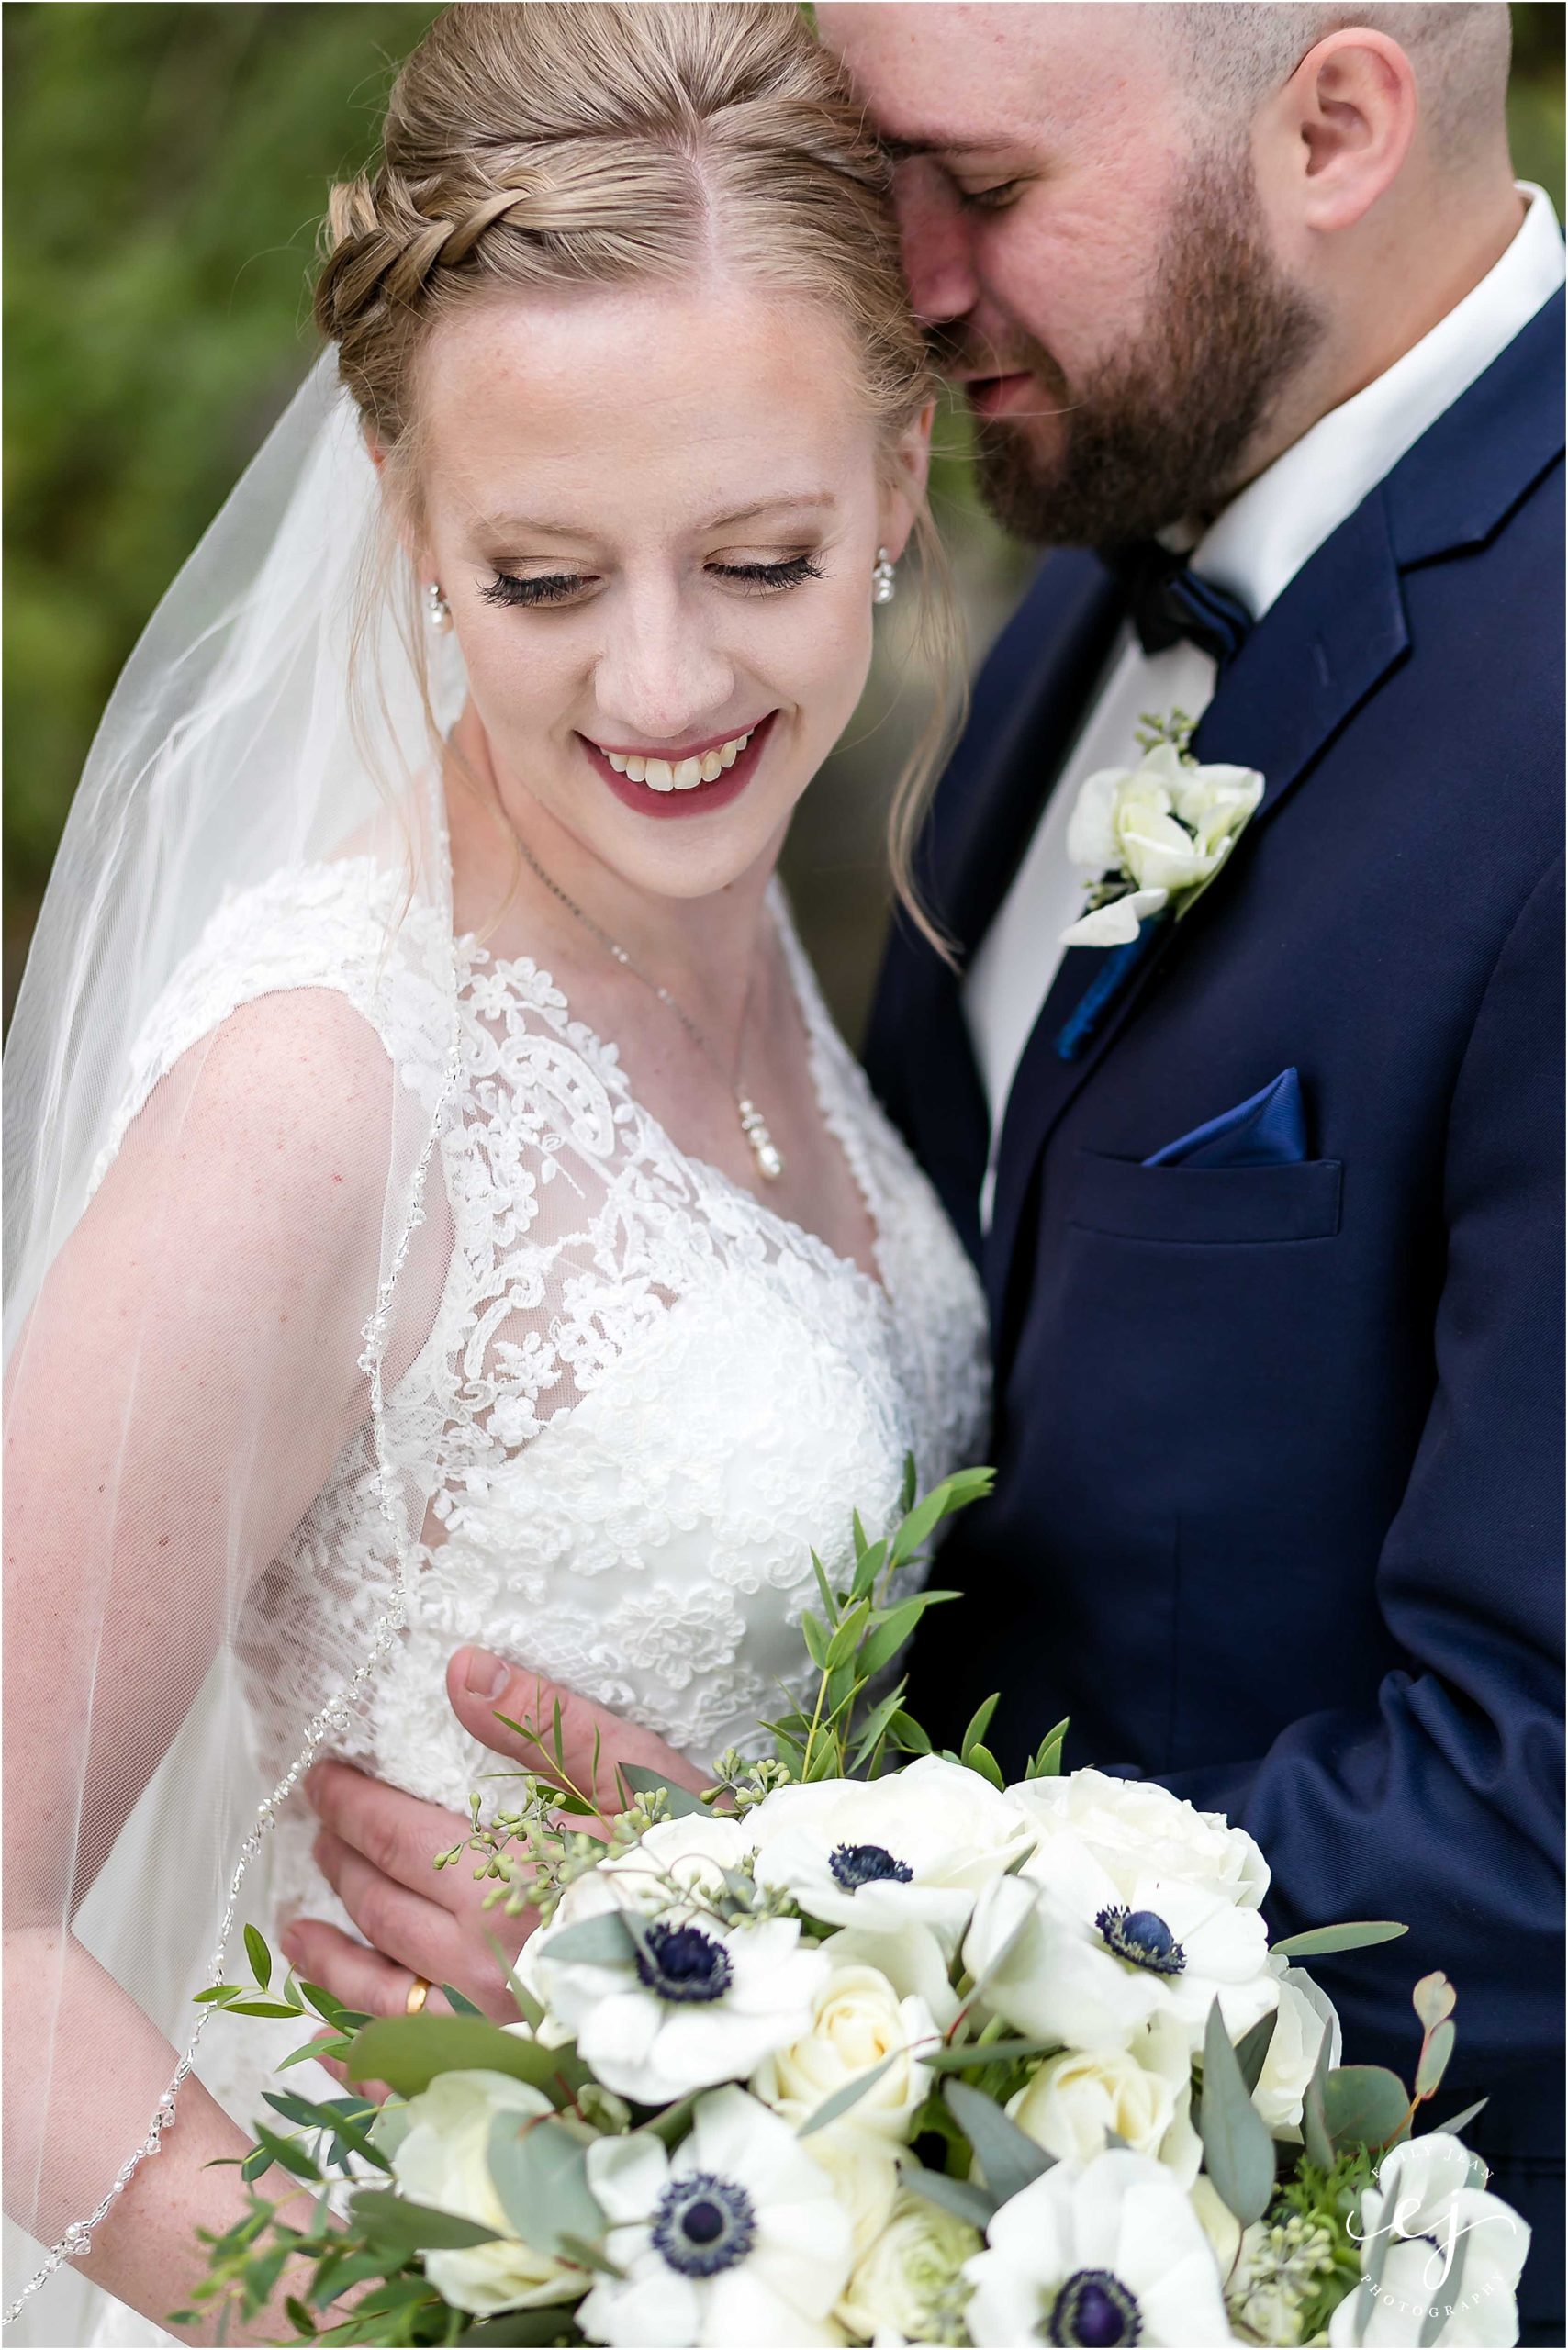 Bride and groom snuggling outside holding bouquet with dark navy center